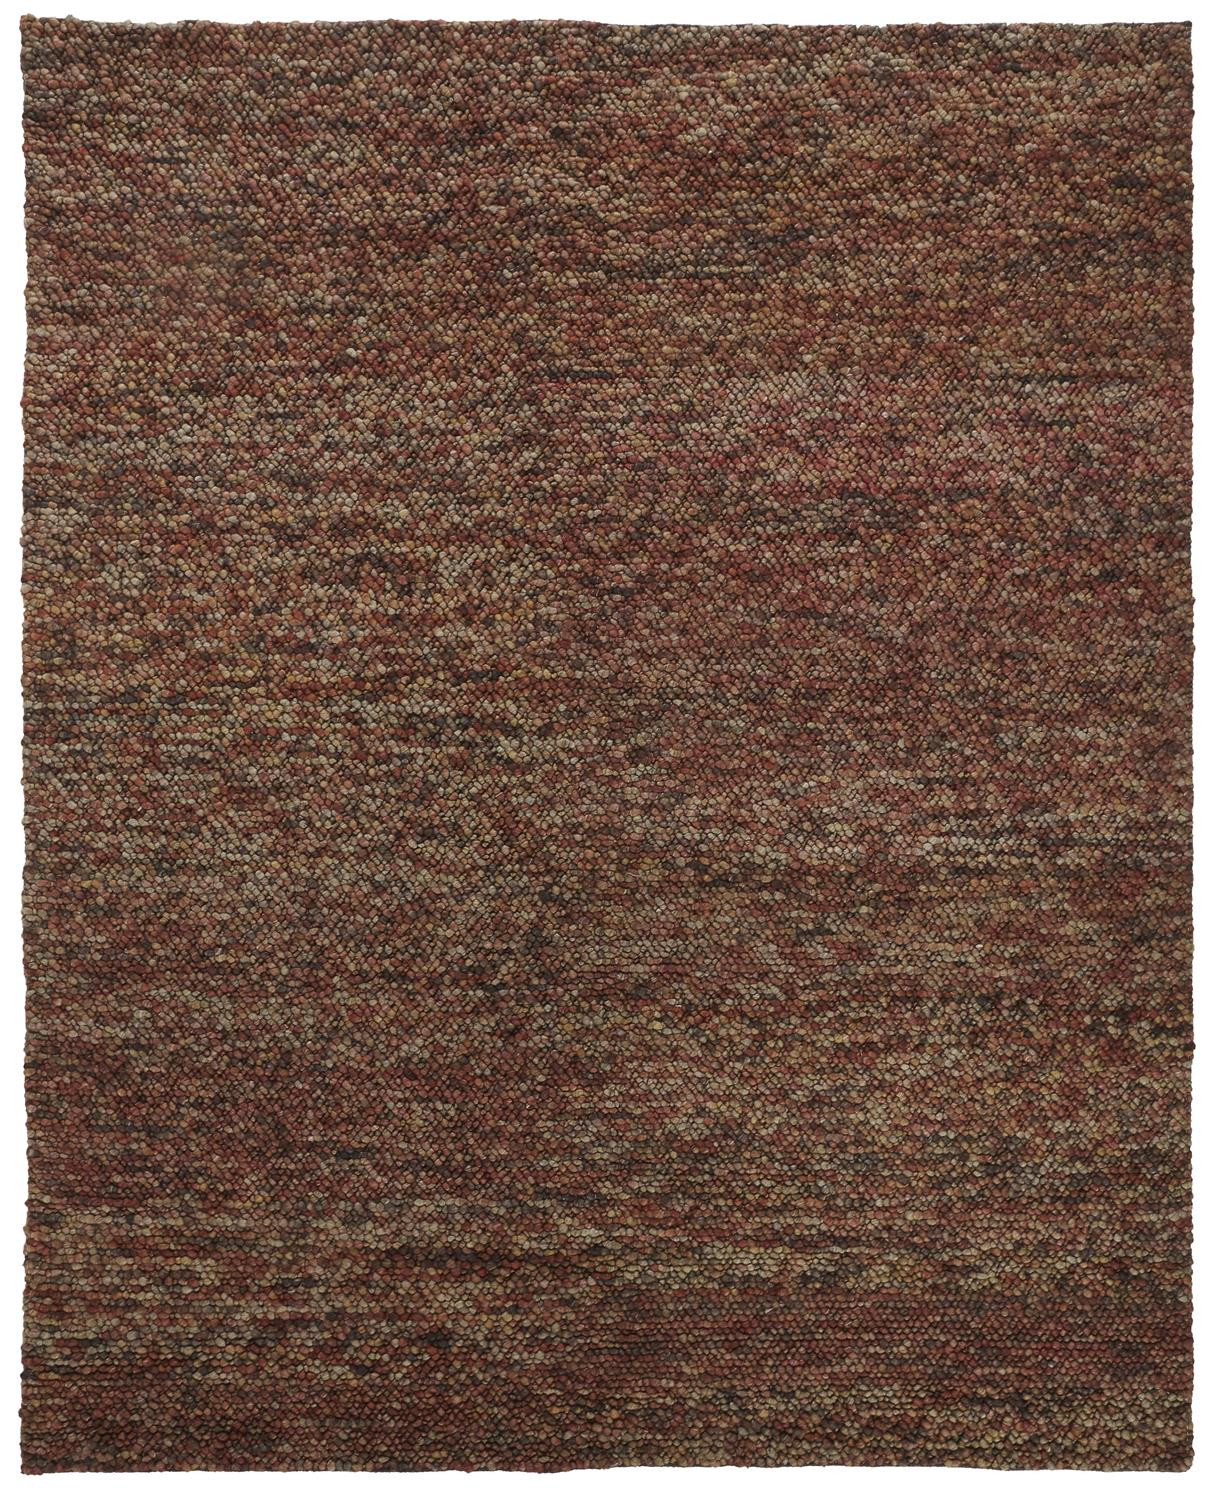 4' X 6' Brown Orange And Red Wool Hand Woven Distressed Stain Resistant Area Rug-515288-1